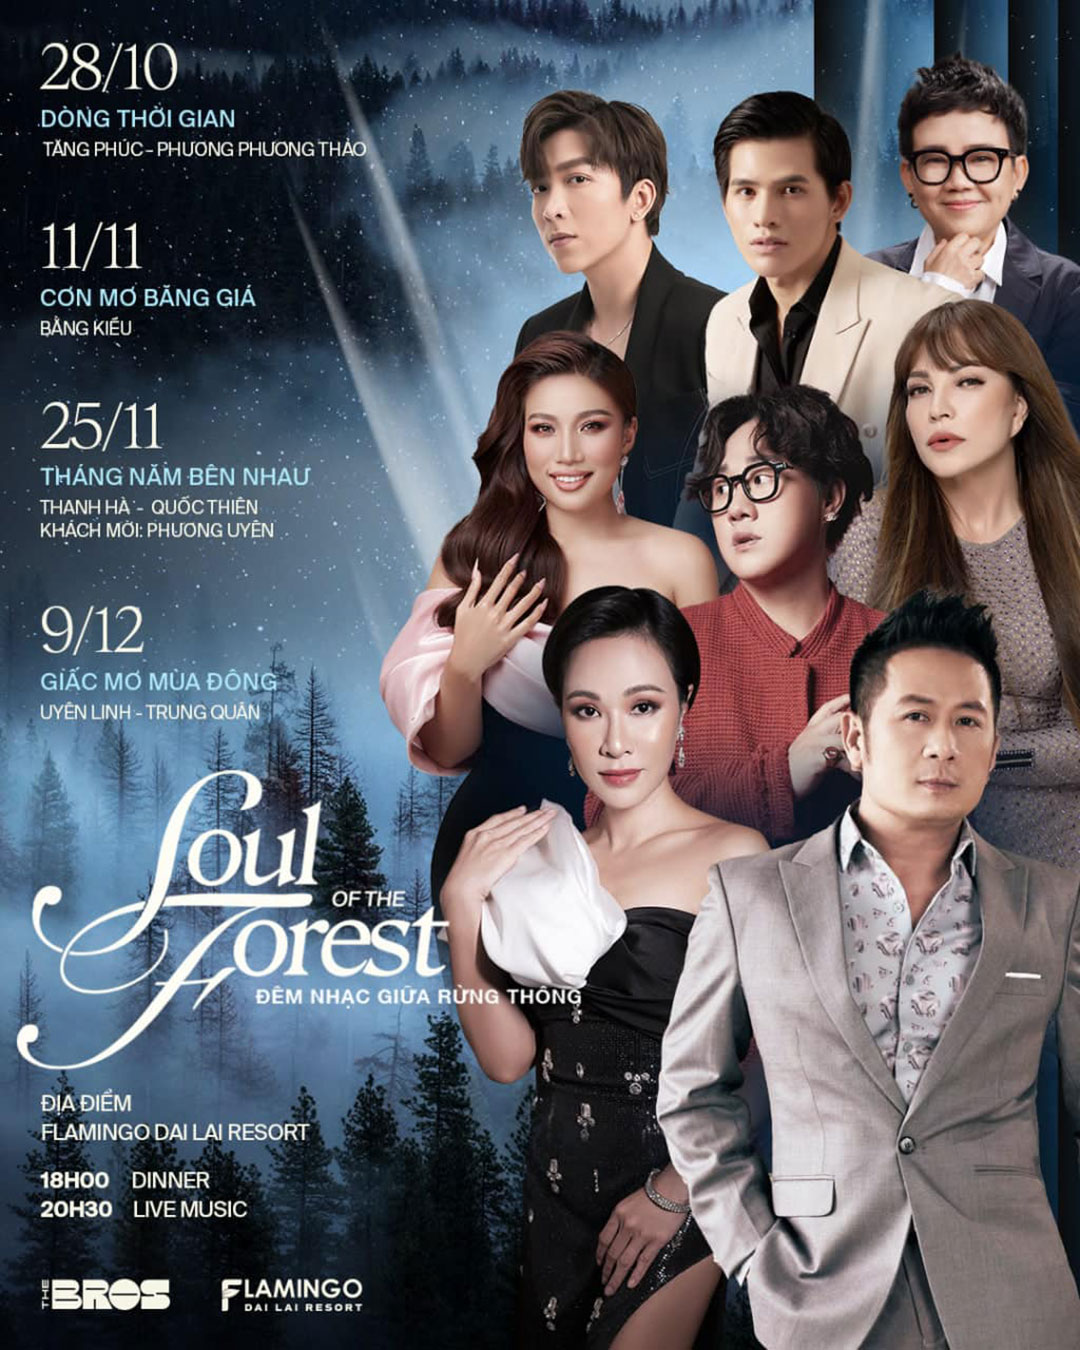 Lịch show Soul Of The Forest Flamingo Đại Lải